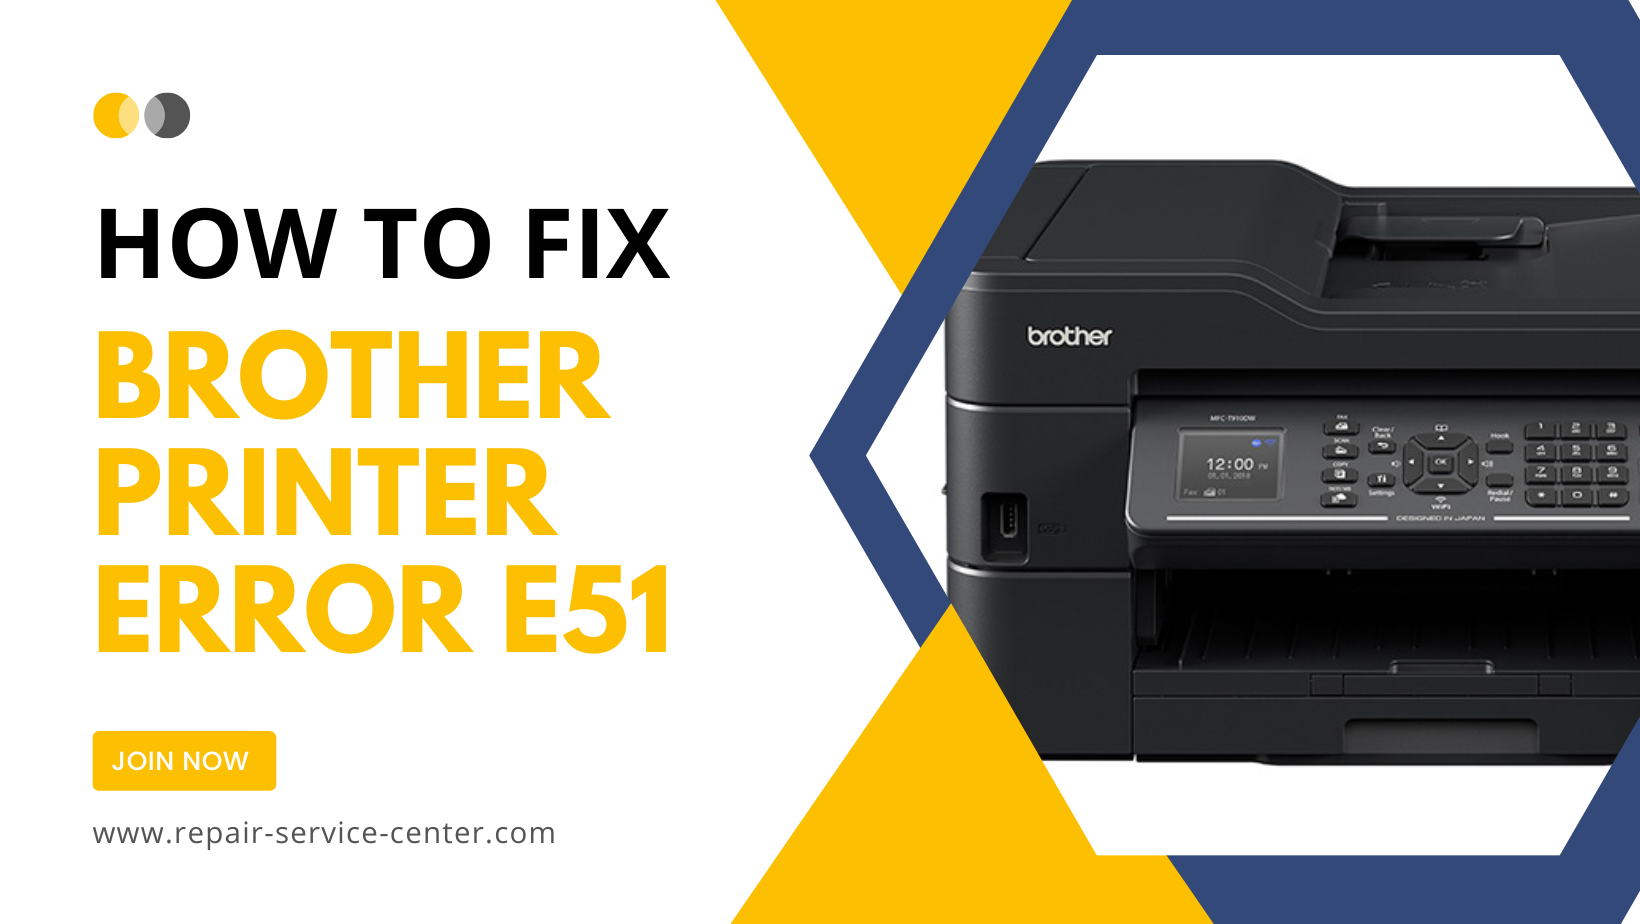 How to fix Brother Printer Error E51 in 4 Easy Steps 